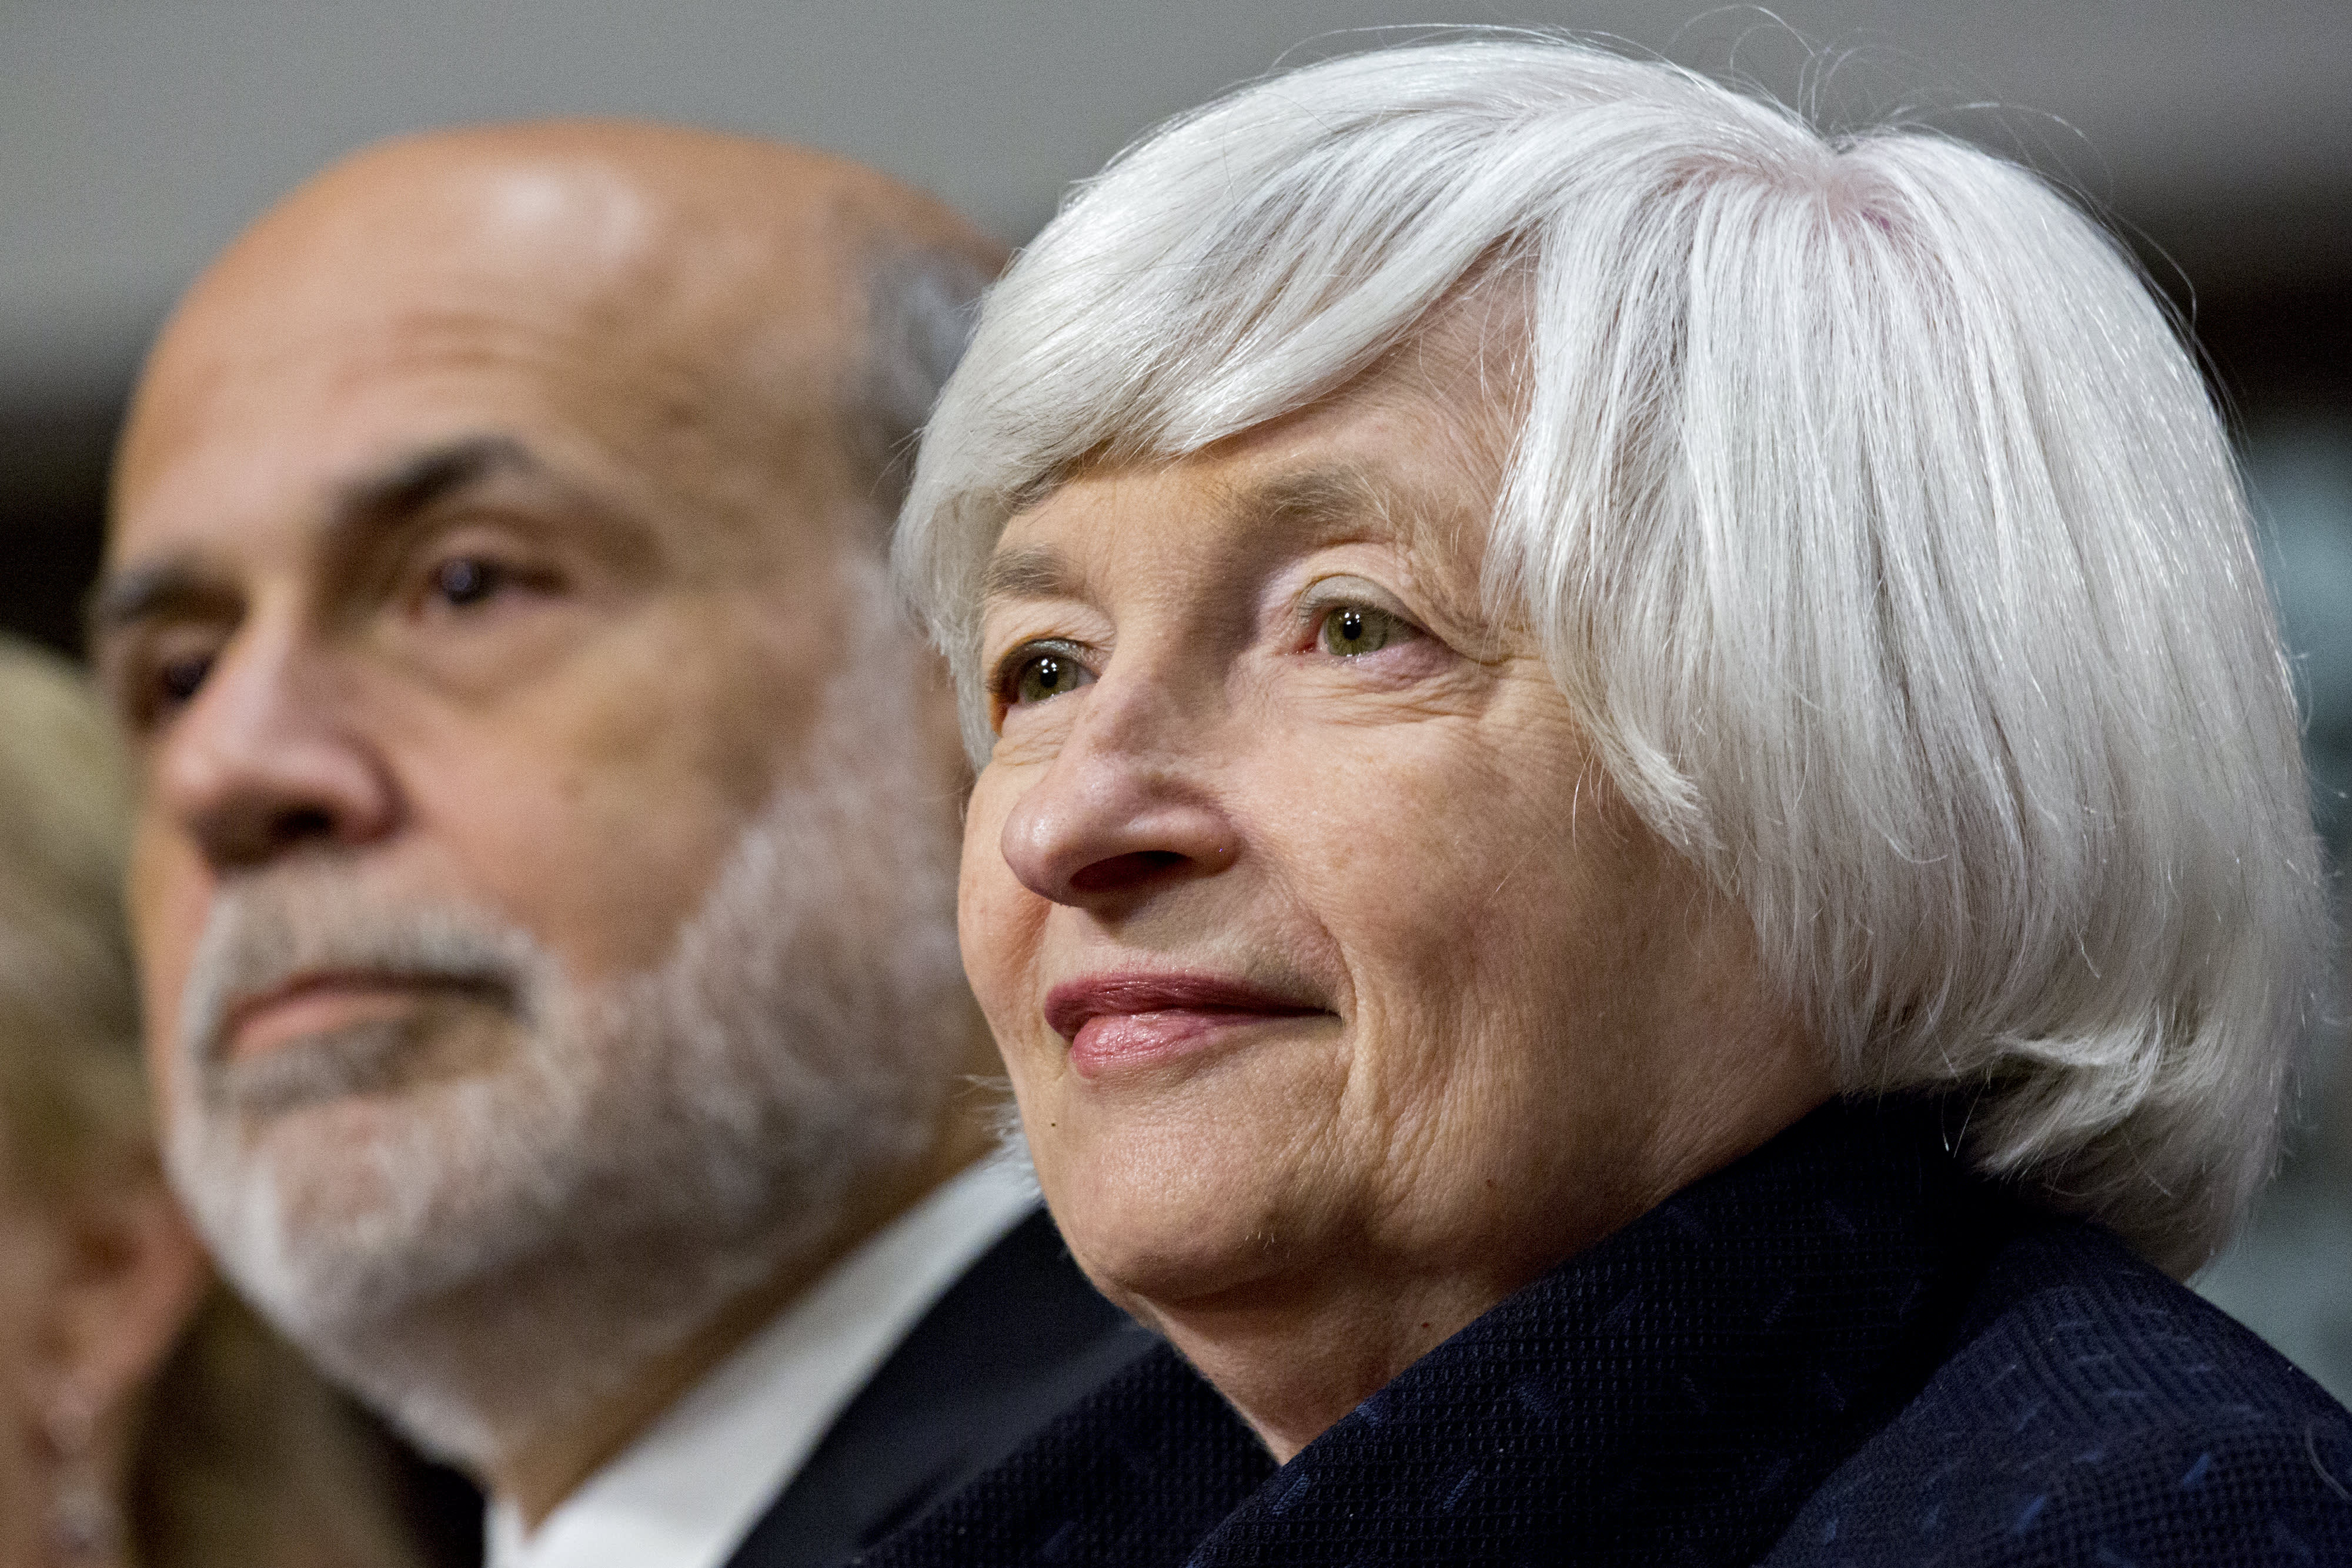 Watch CNBC's full interview with former Fed chair Janet Yellen